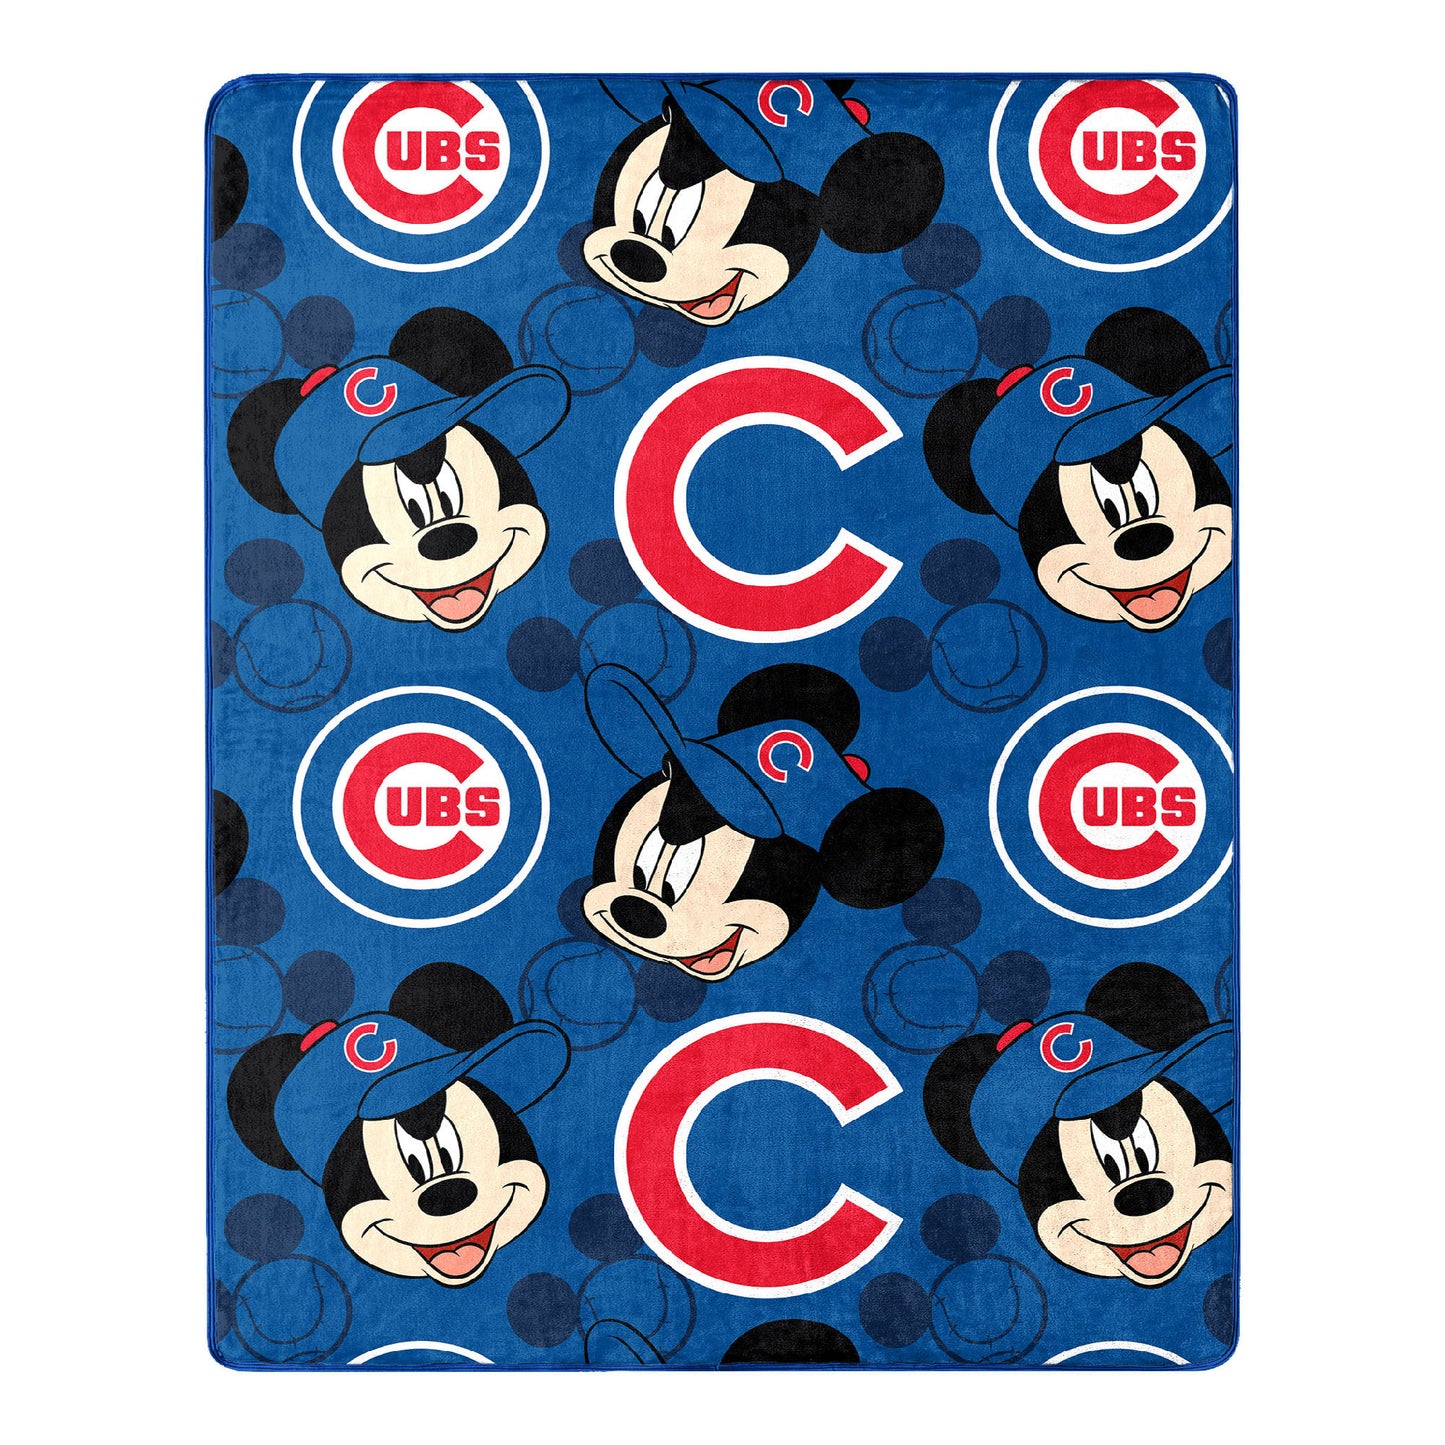 Cubs OFFICIAL MLB & Disney's Mickey Mouse Character Hugger Pillow & Silk Touch Throw Set;  40" x 50"